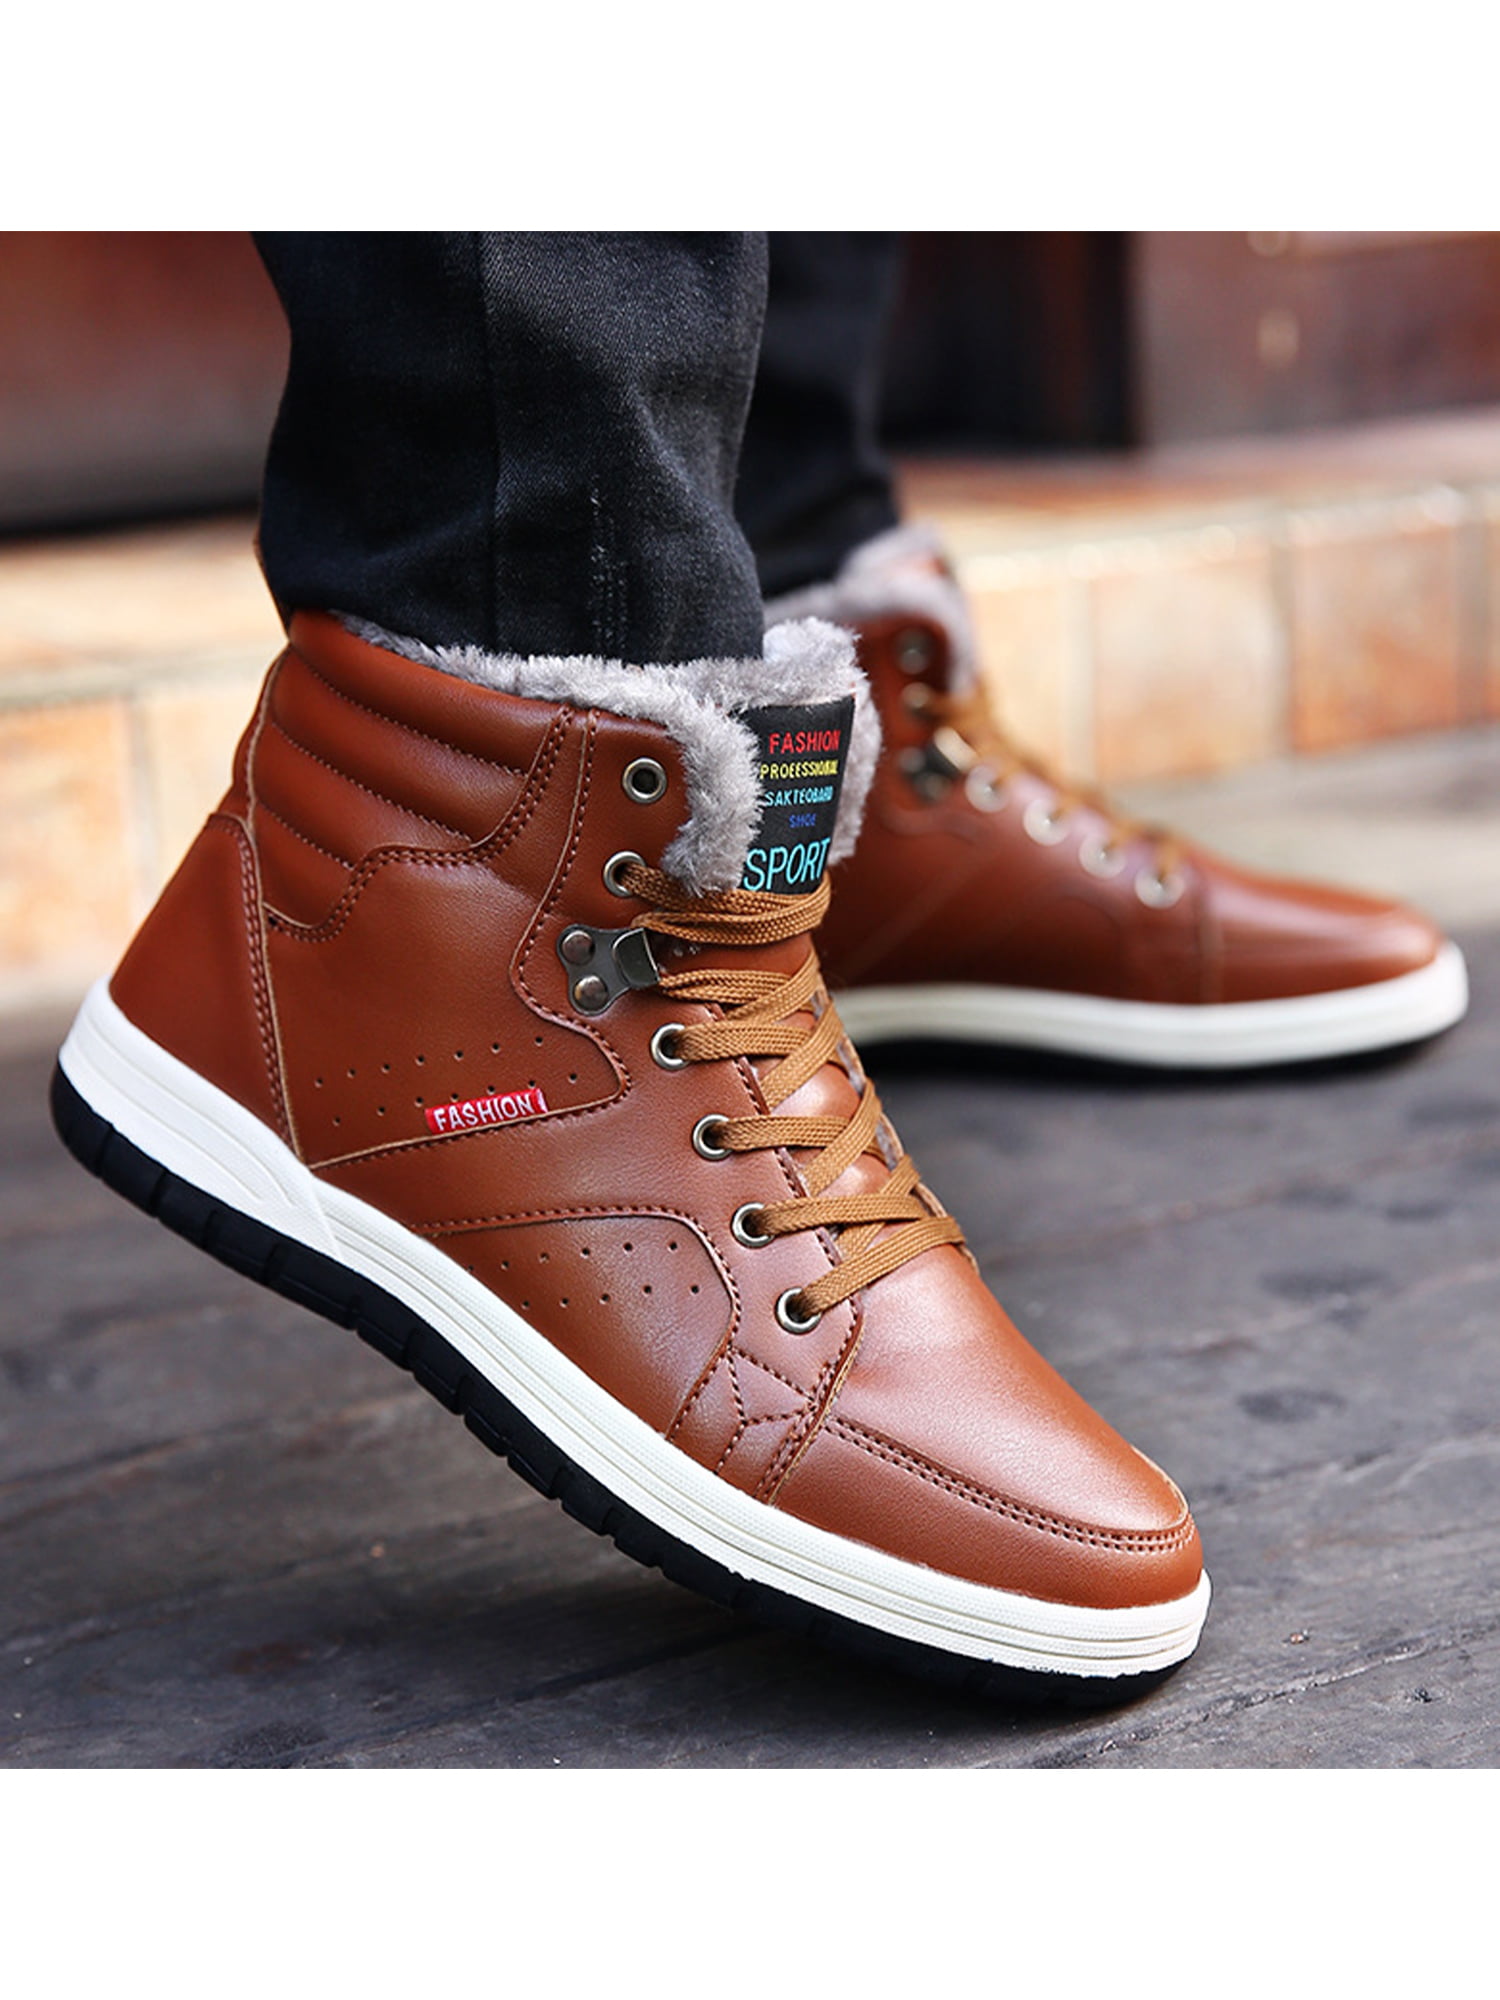 Mens Leather Boots Ankle Sneakers High Top Outdoor Winter Shoes with Fur Lining 